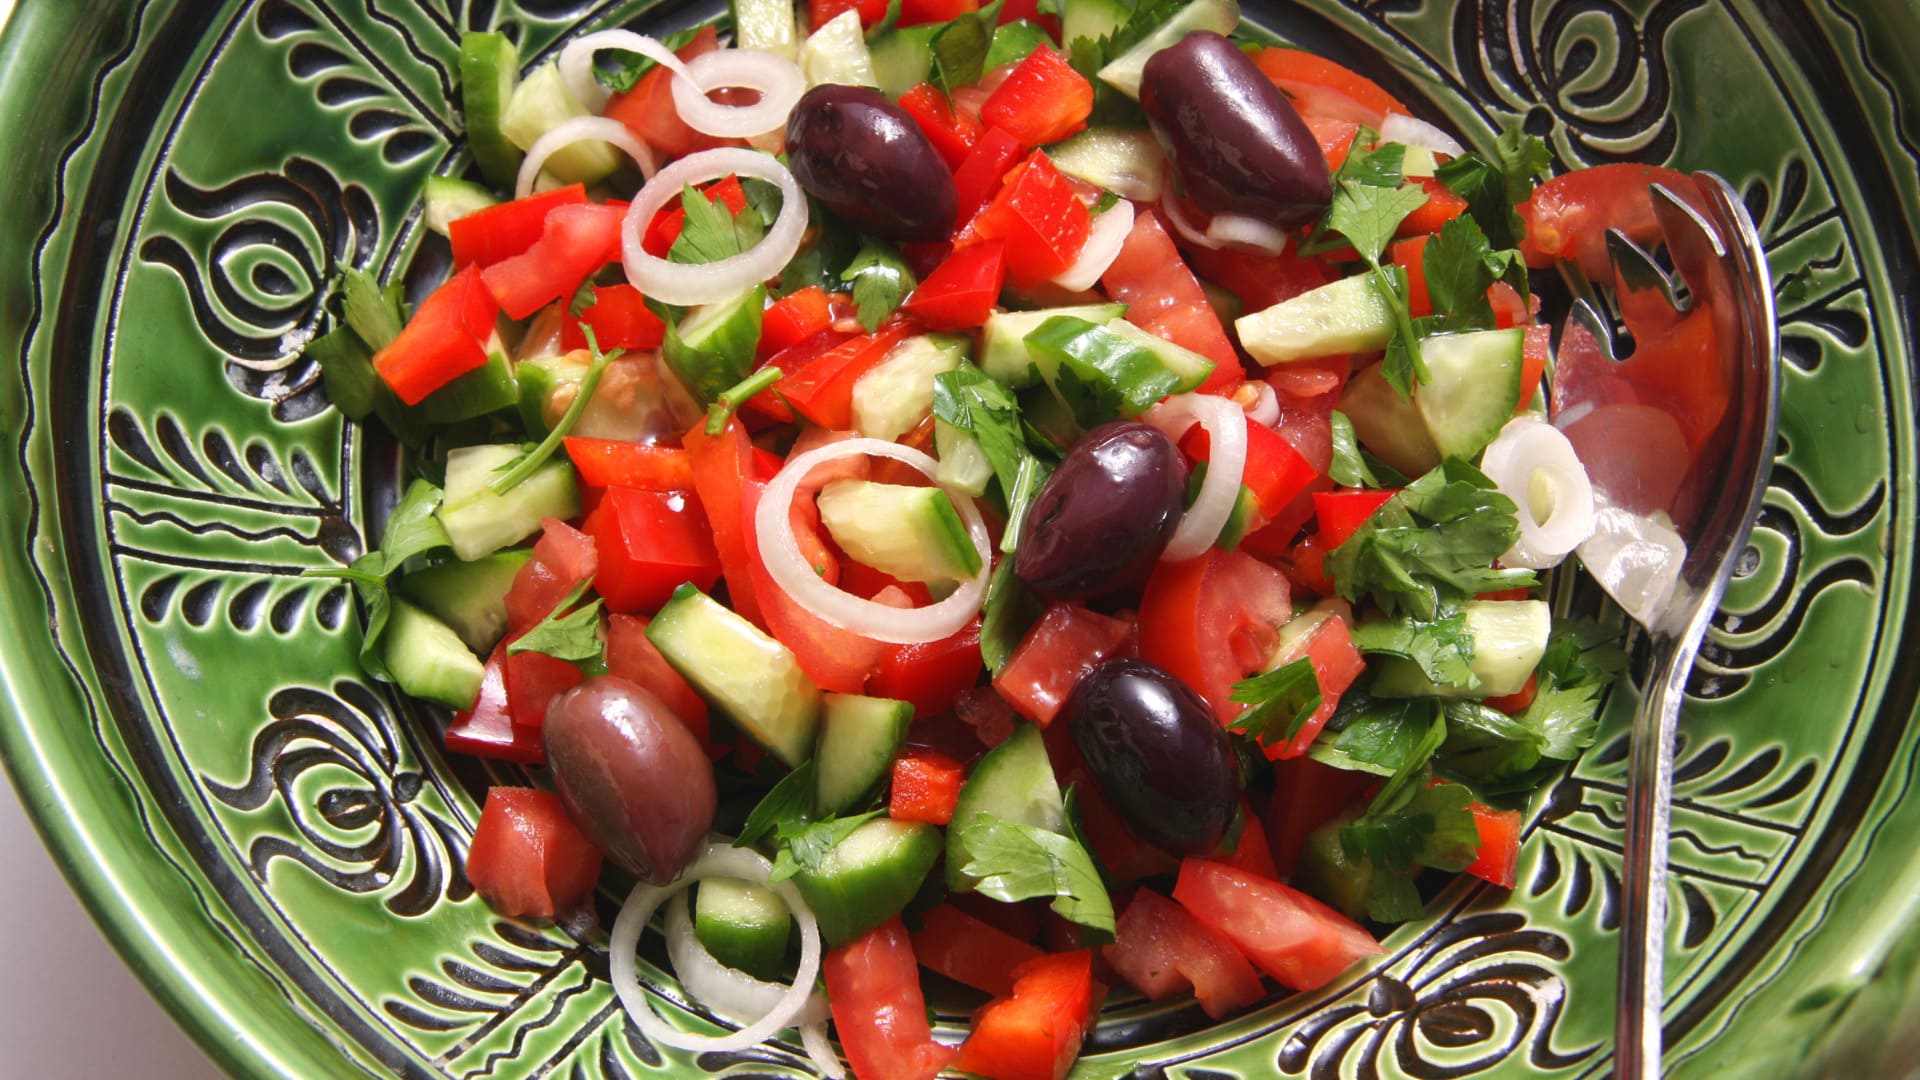 Whip Up a Burst of Mediterranean Flavors with Mama Fatma Salad - A Refreshing Salad Recipe to Try Today!1